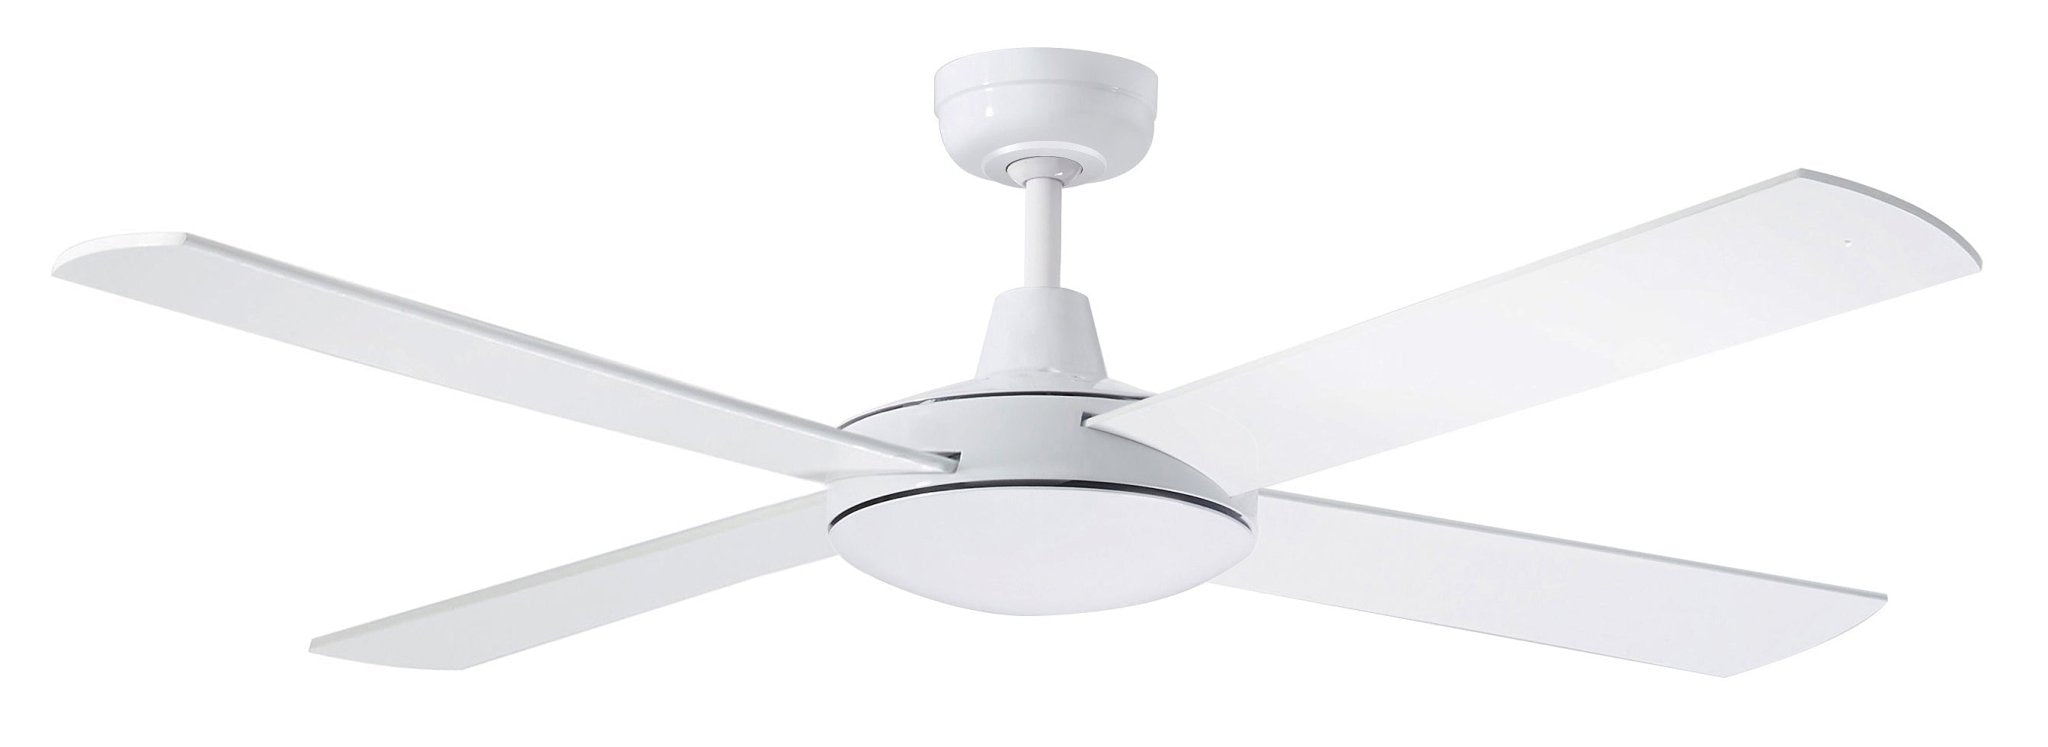 52" (1300mm) Lifestyle DC Ceiling Fan Only in Brushed Aluminium or White - Mases LightingMartec